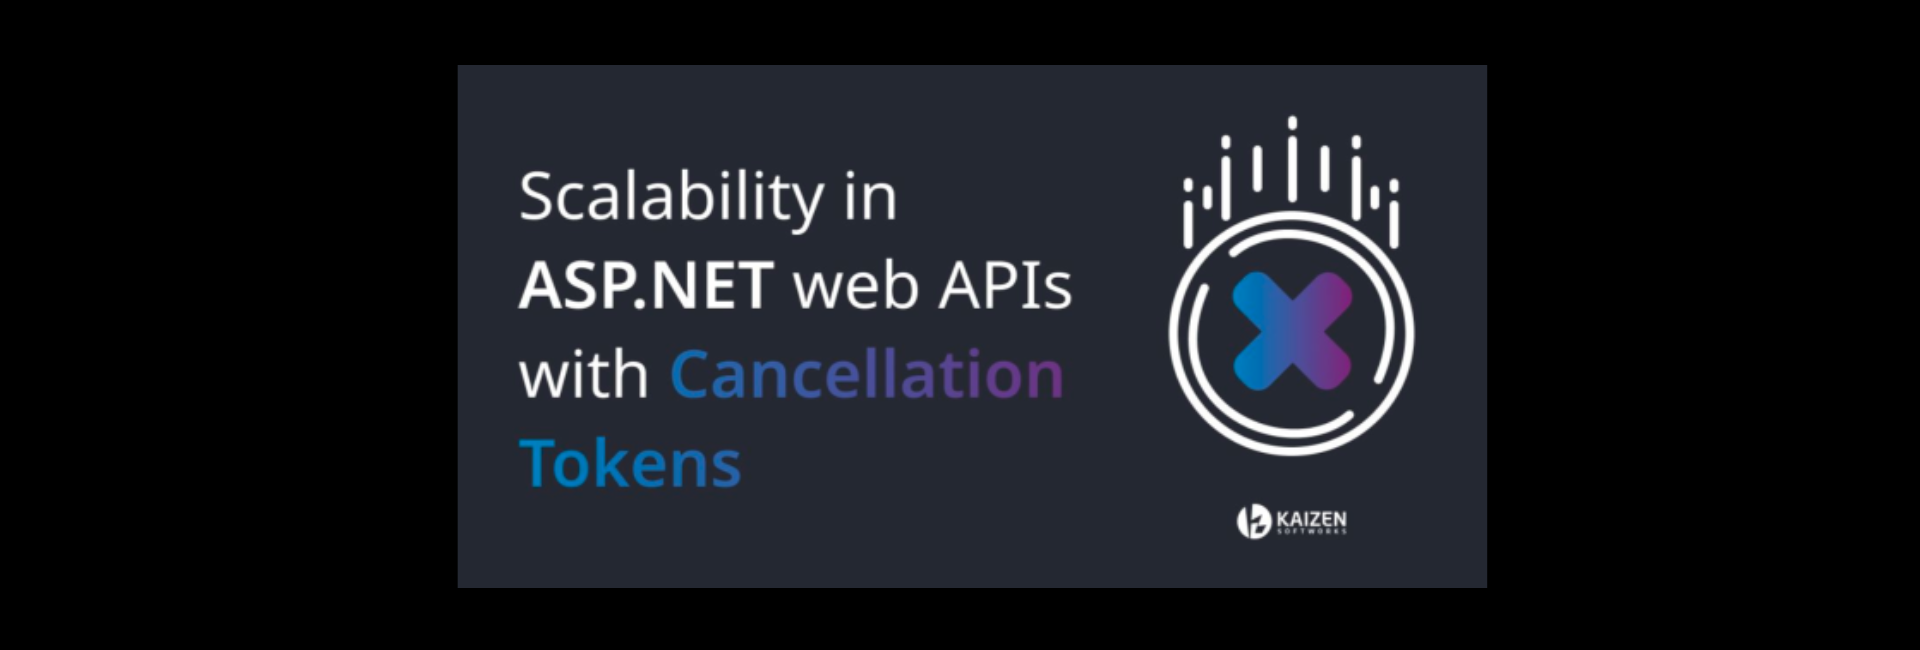 Scalability in ASP.NET web APIs with Cancellation Tokens